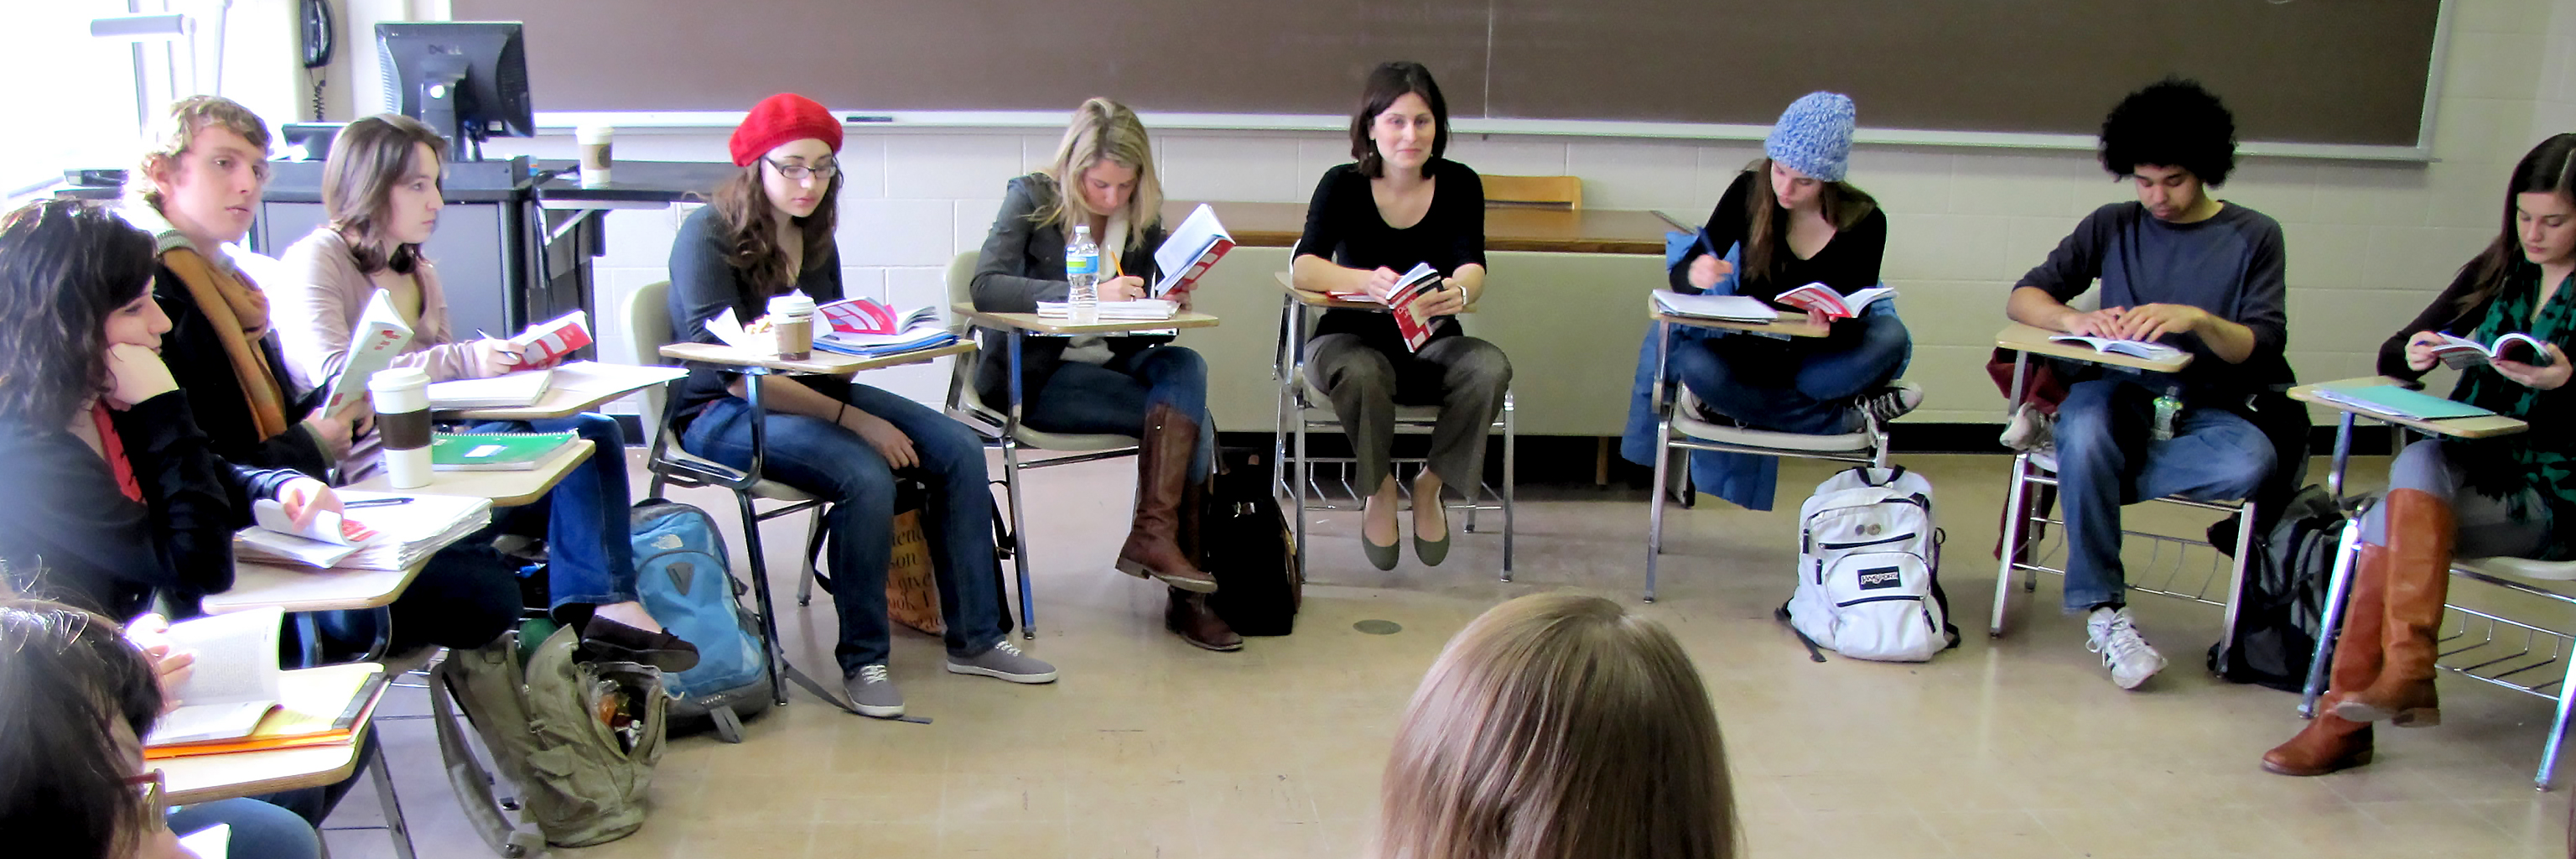 Students in a French Instruction classroom on the Indiana University Bloomington campus.